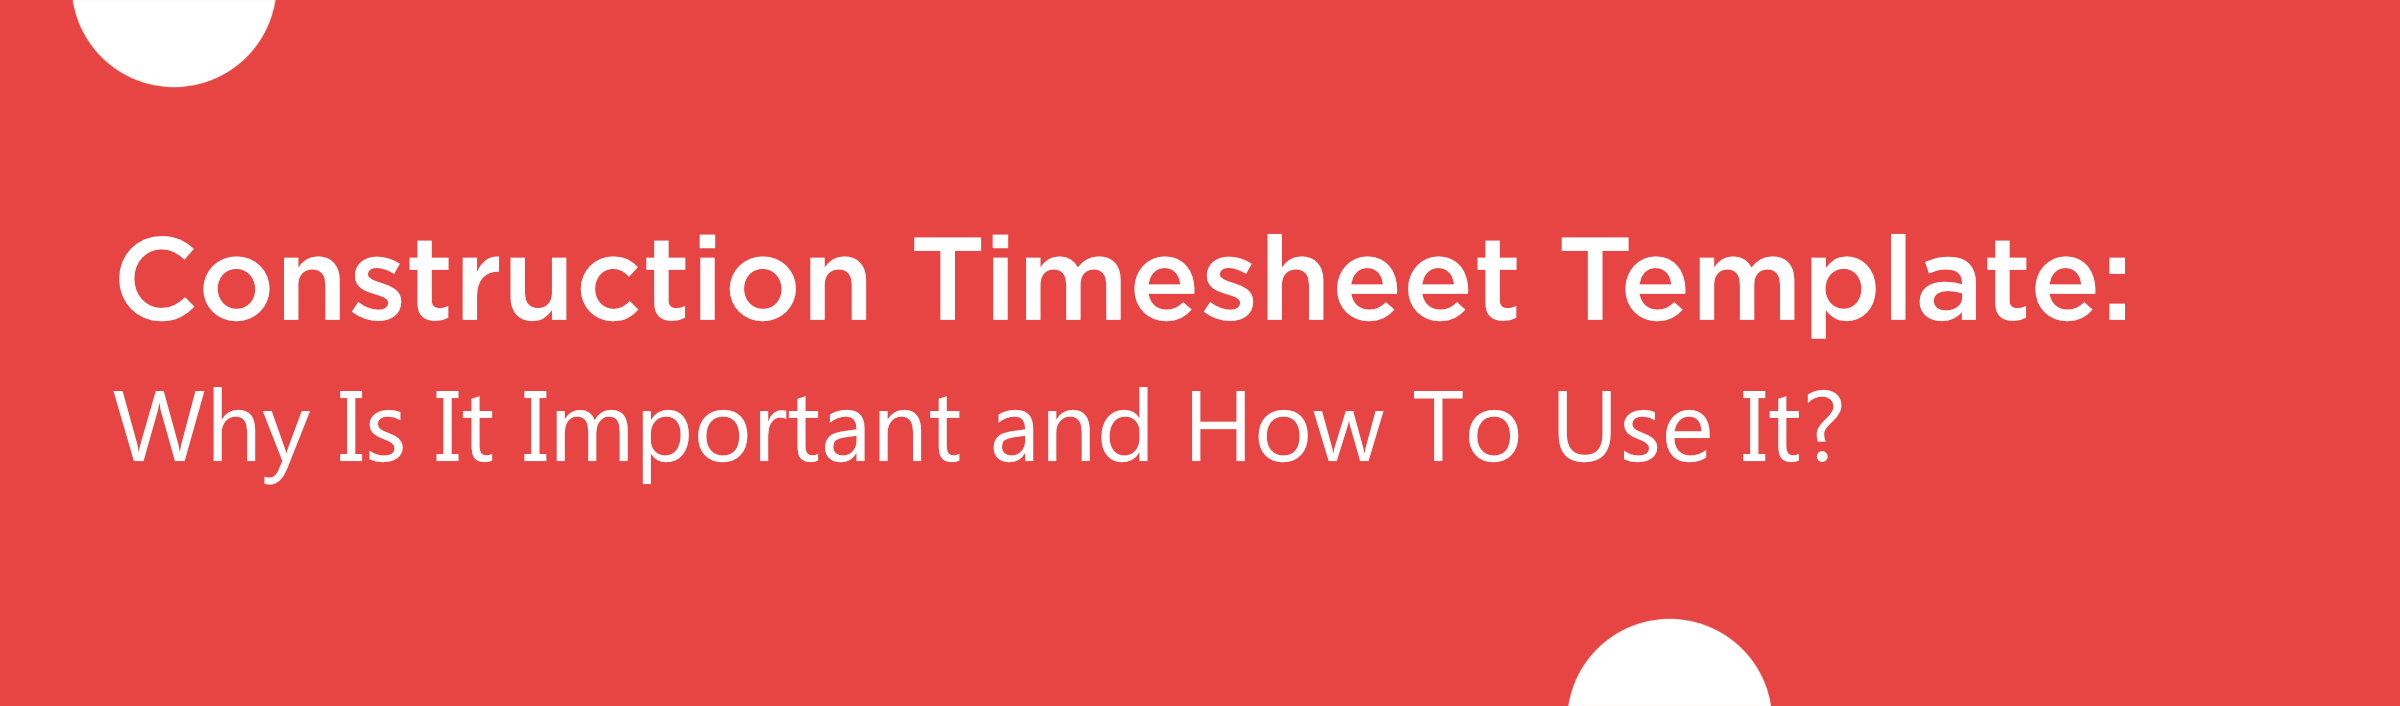 Free Construction Timesheet Template in Excel: Time Cards for Daily, Weekly & Monthly Tracking of Construction Workers